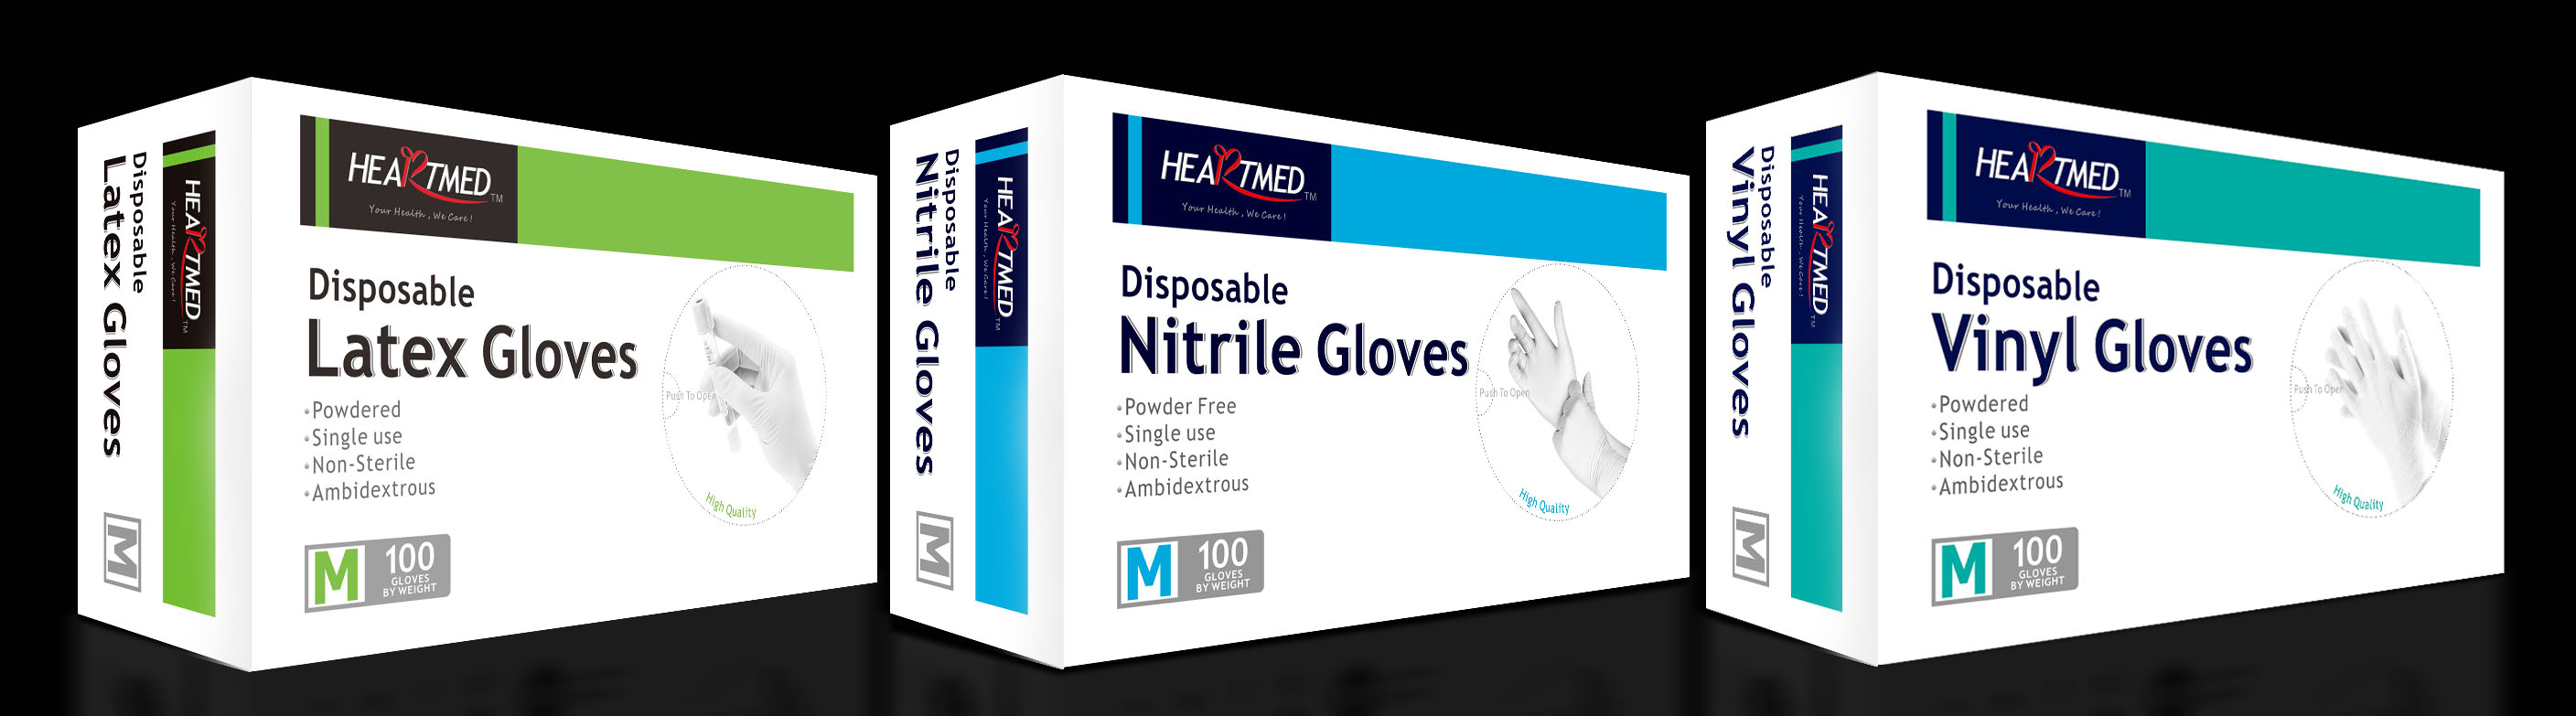 Tips for Finding the Right Type of Disposable Glove for Your Job